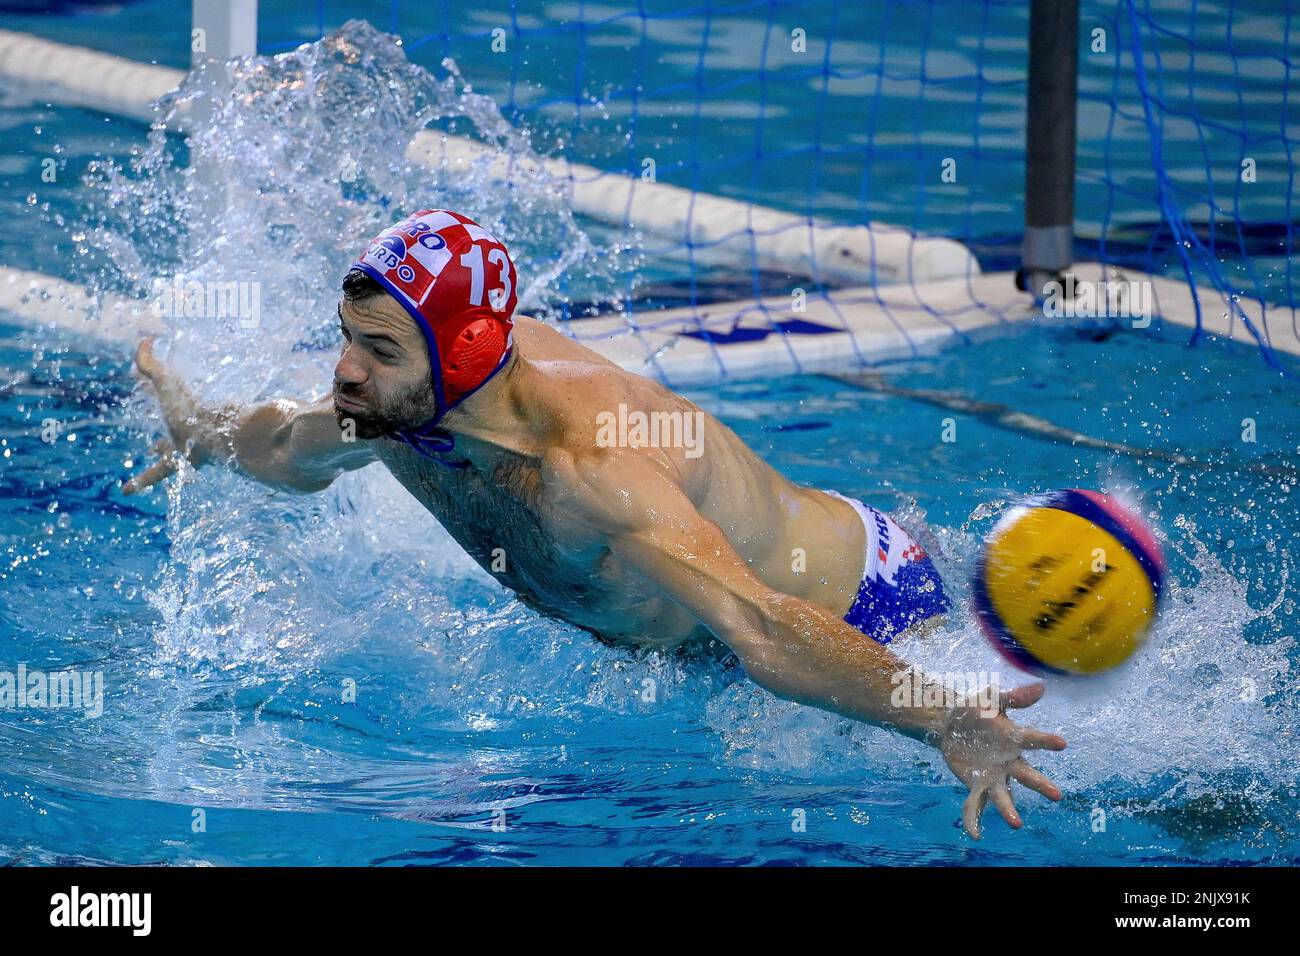 Goalkeeper Toni Popadic of Croatia in action during the Men's Water Polo  Group B third round match between Croatia and Japan, at the 19th FINA World  Championships in Debrecen, northeastern Hungary, Saturday,